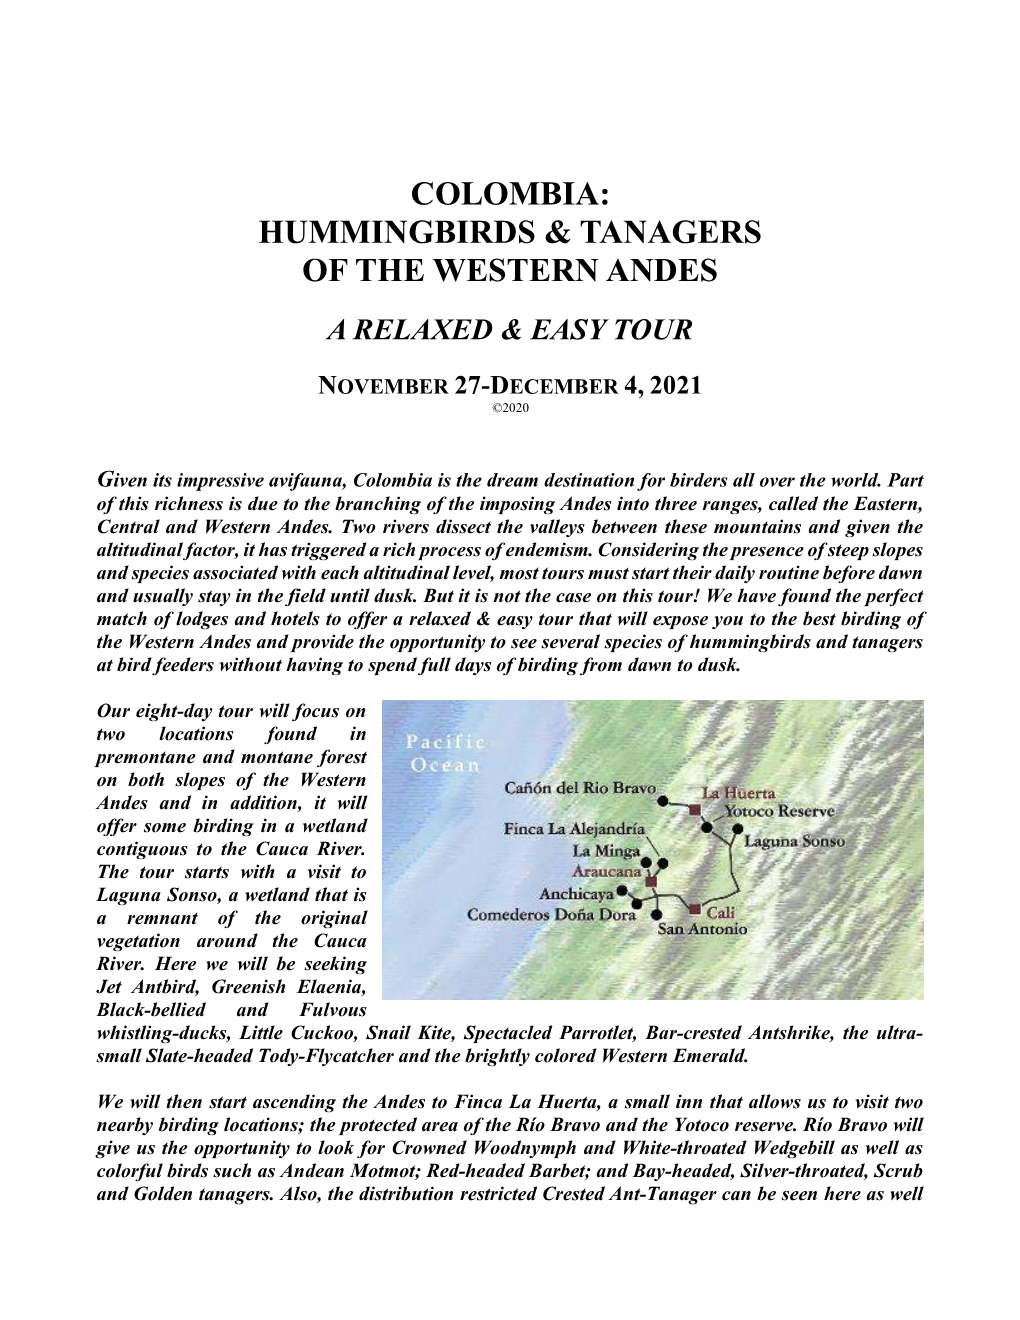 Colombia: Hummingbirds & Tanagers of the Western Andes